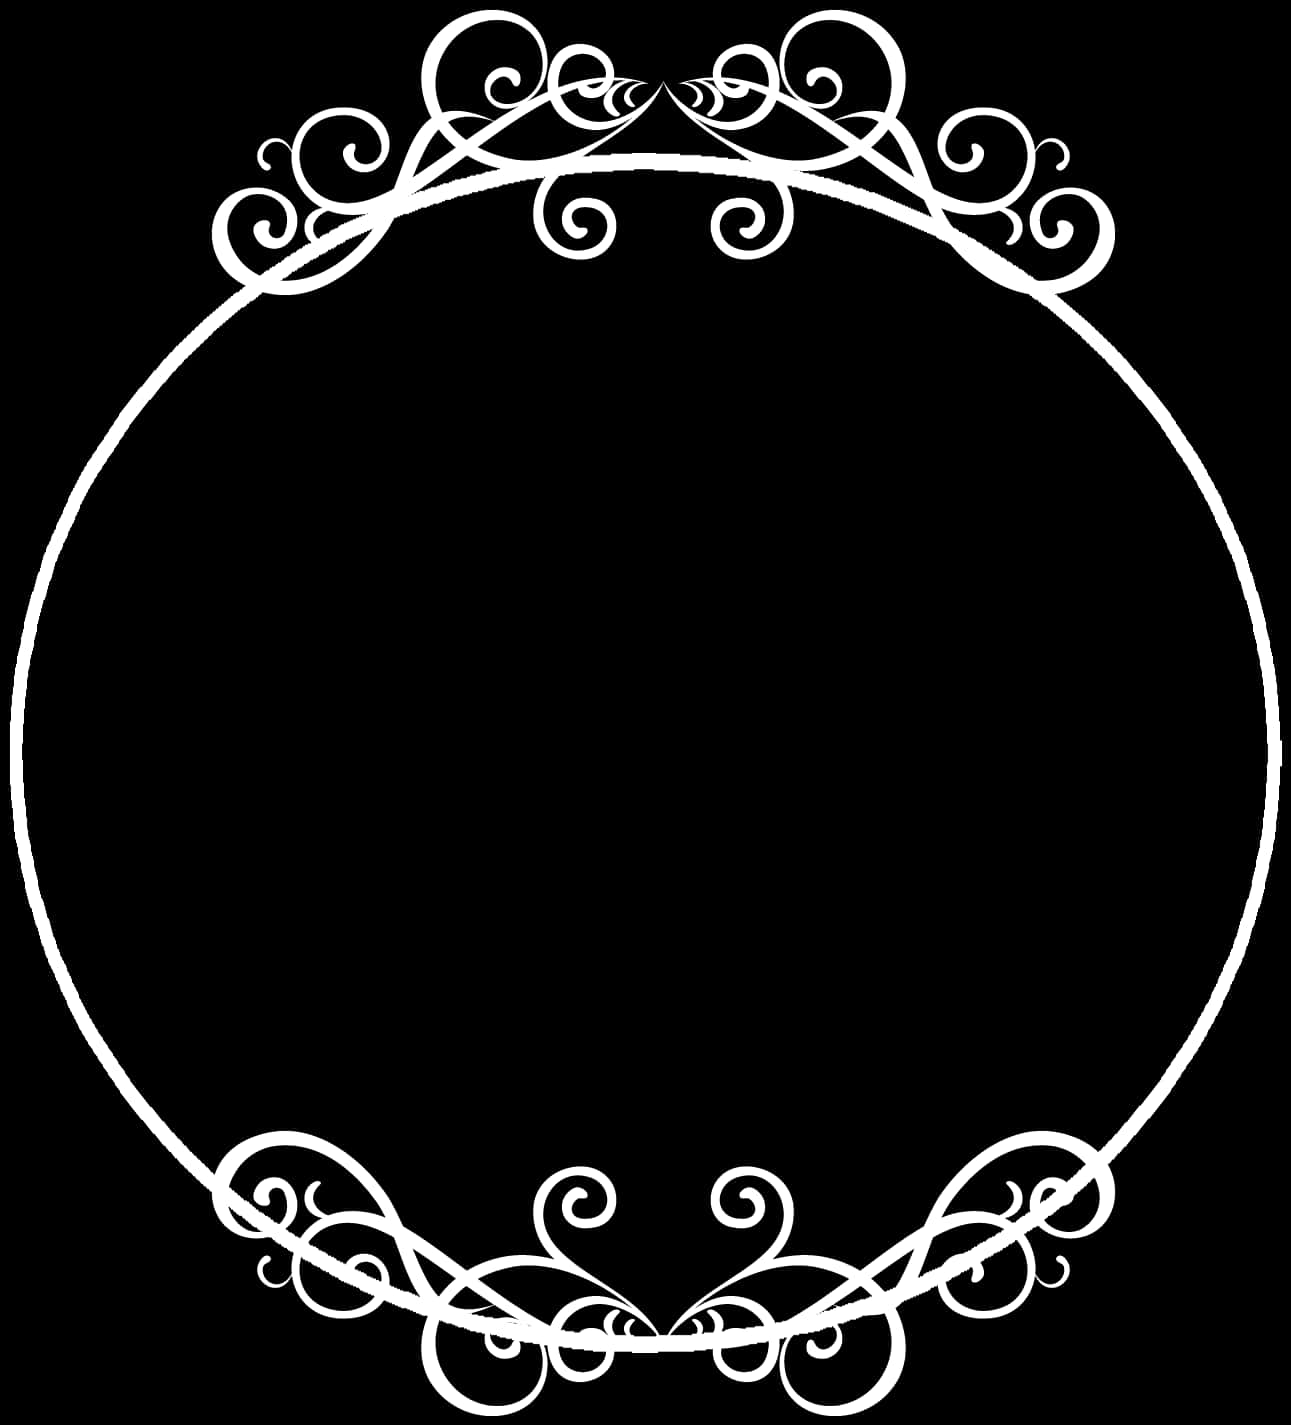 A White Circle With Swirls On A Black Background